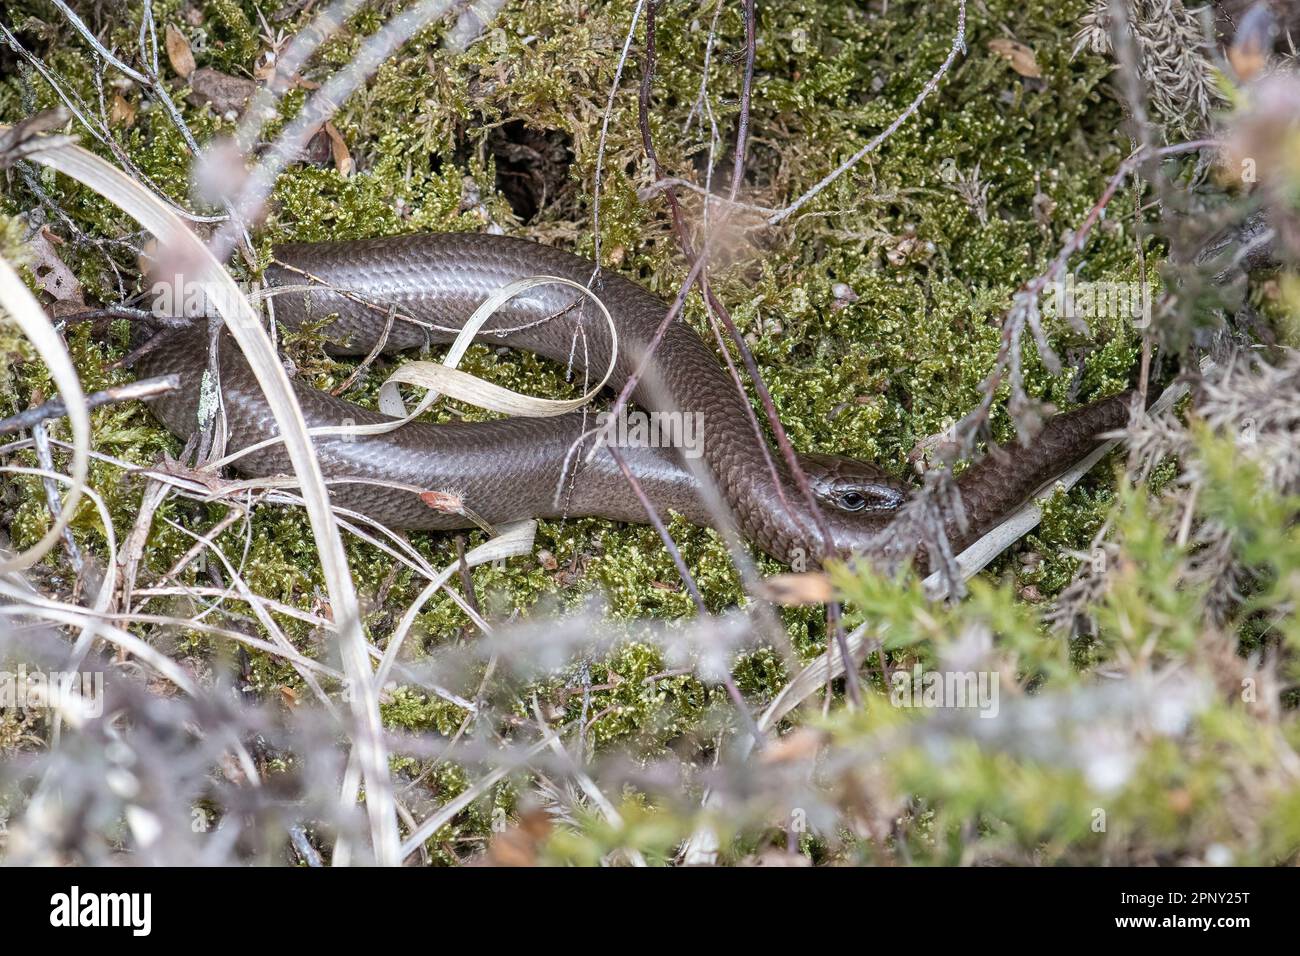 Slow worm, Anguis fragilis, an adult male animal basking on moss in heathland during spring, Surrey, England, UK Stock Photo